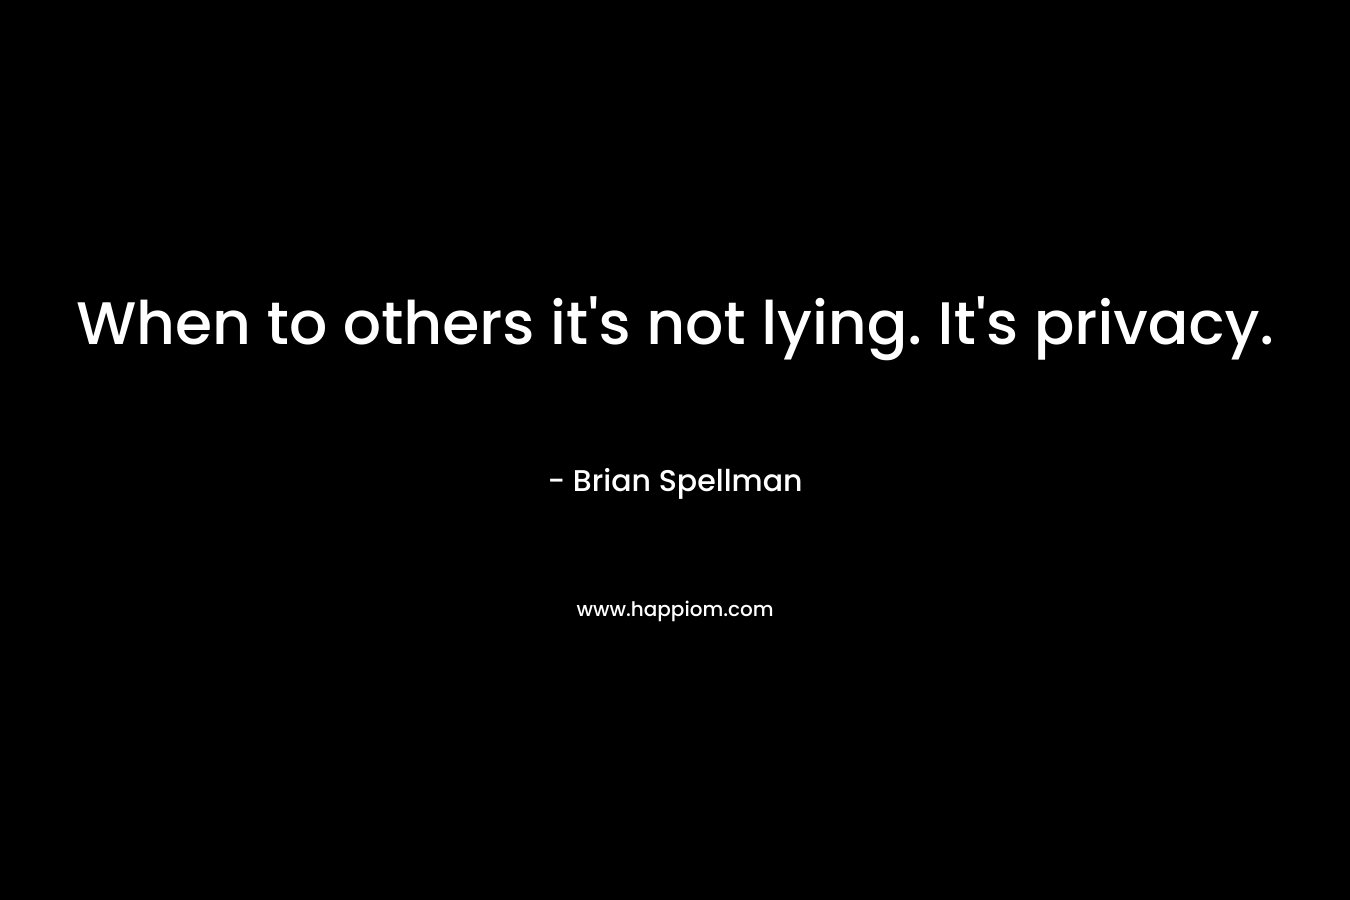 When to others it’s not lying. It’s privacy. – Brian Spellman